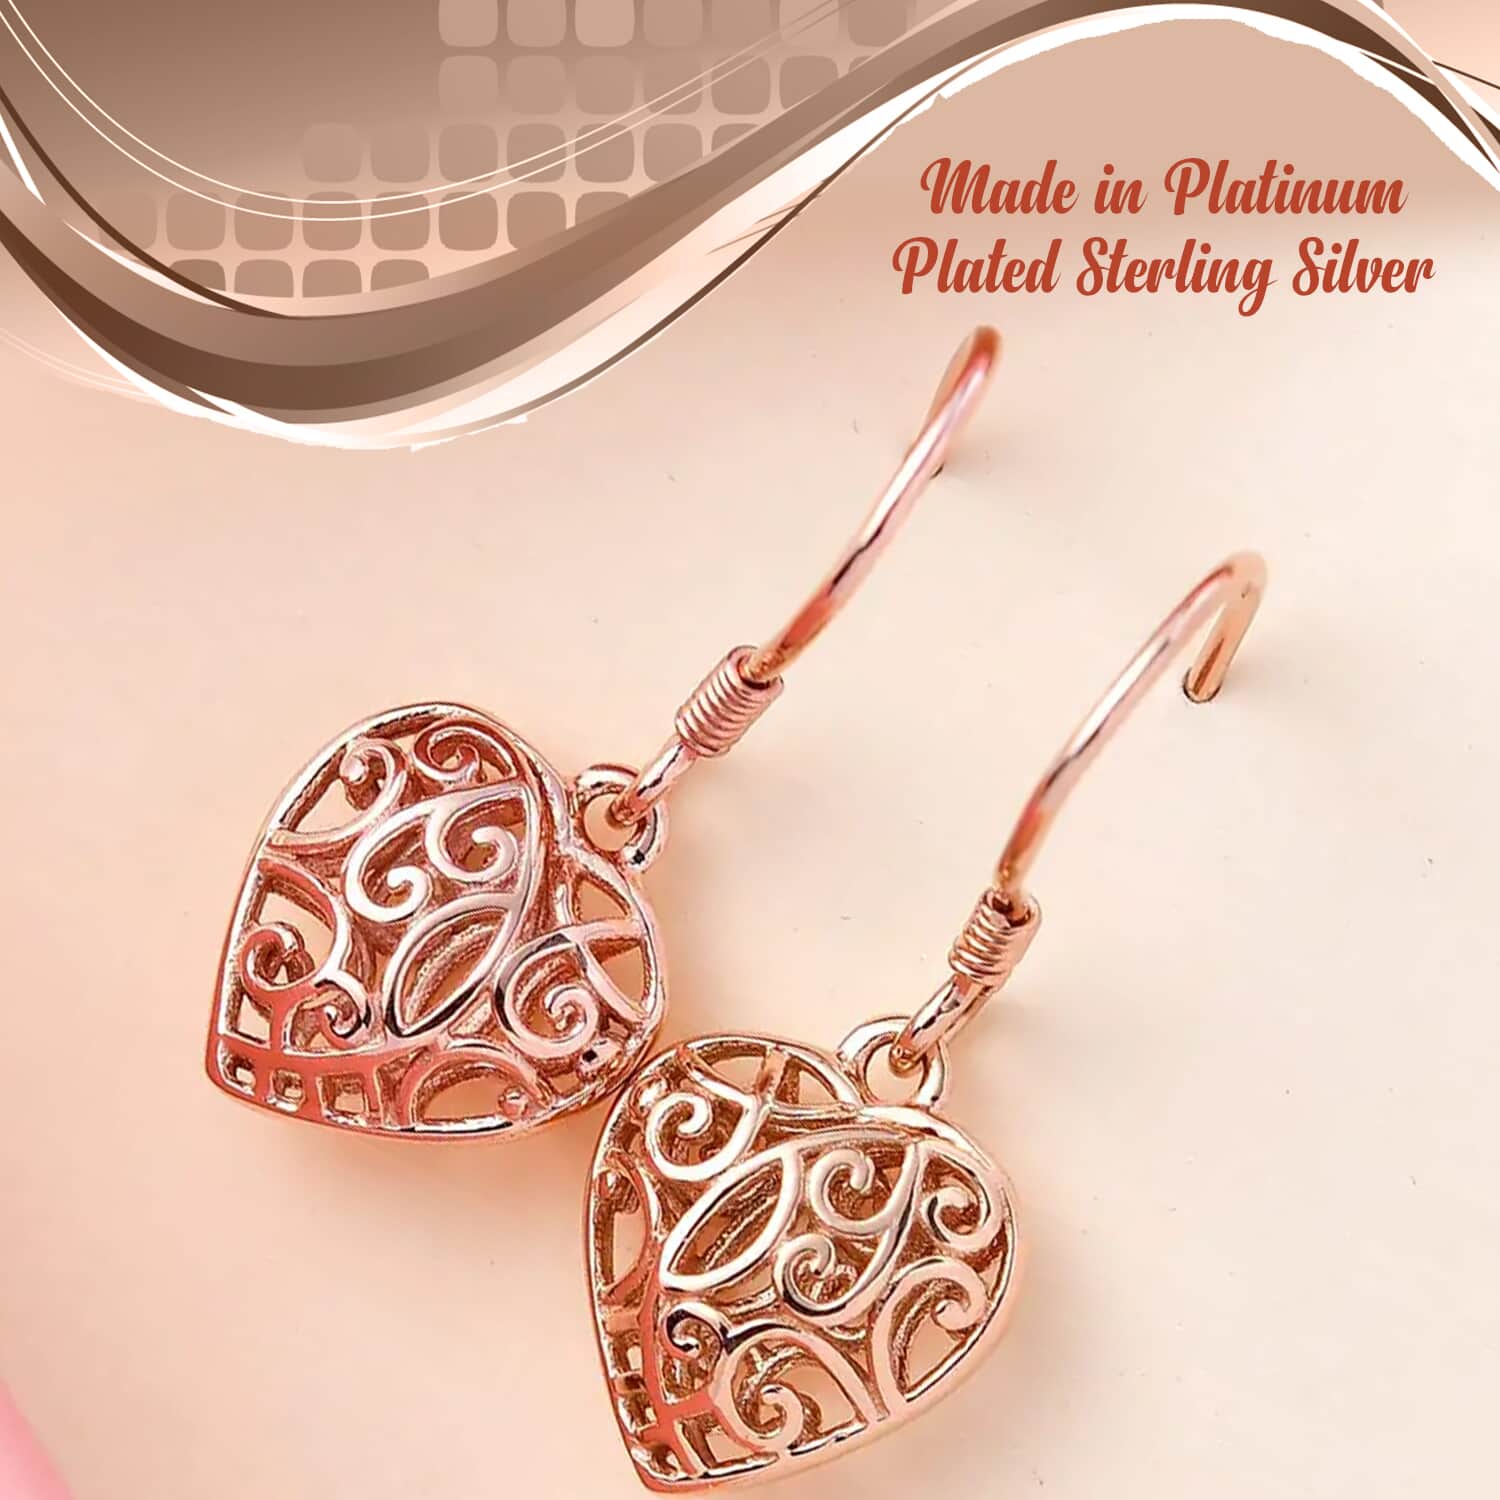 Mother’s Day Gift Openwork Drop Dangle Earrings in 14K Rose Gold Plated  Sterling Silver, Filigree Heart Earrings, Dangle Silver Earrings For Women